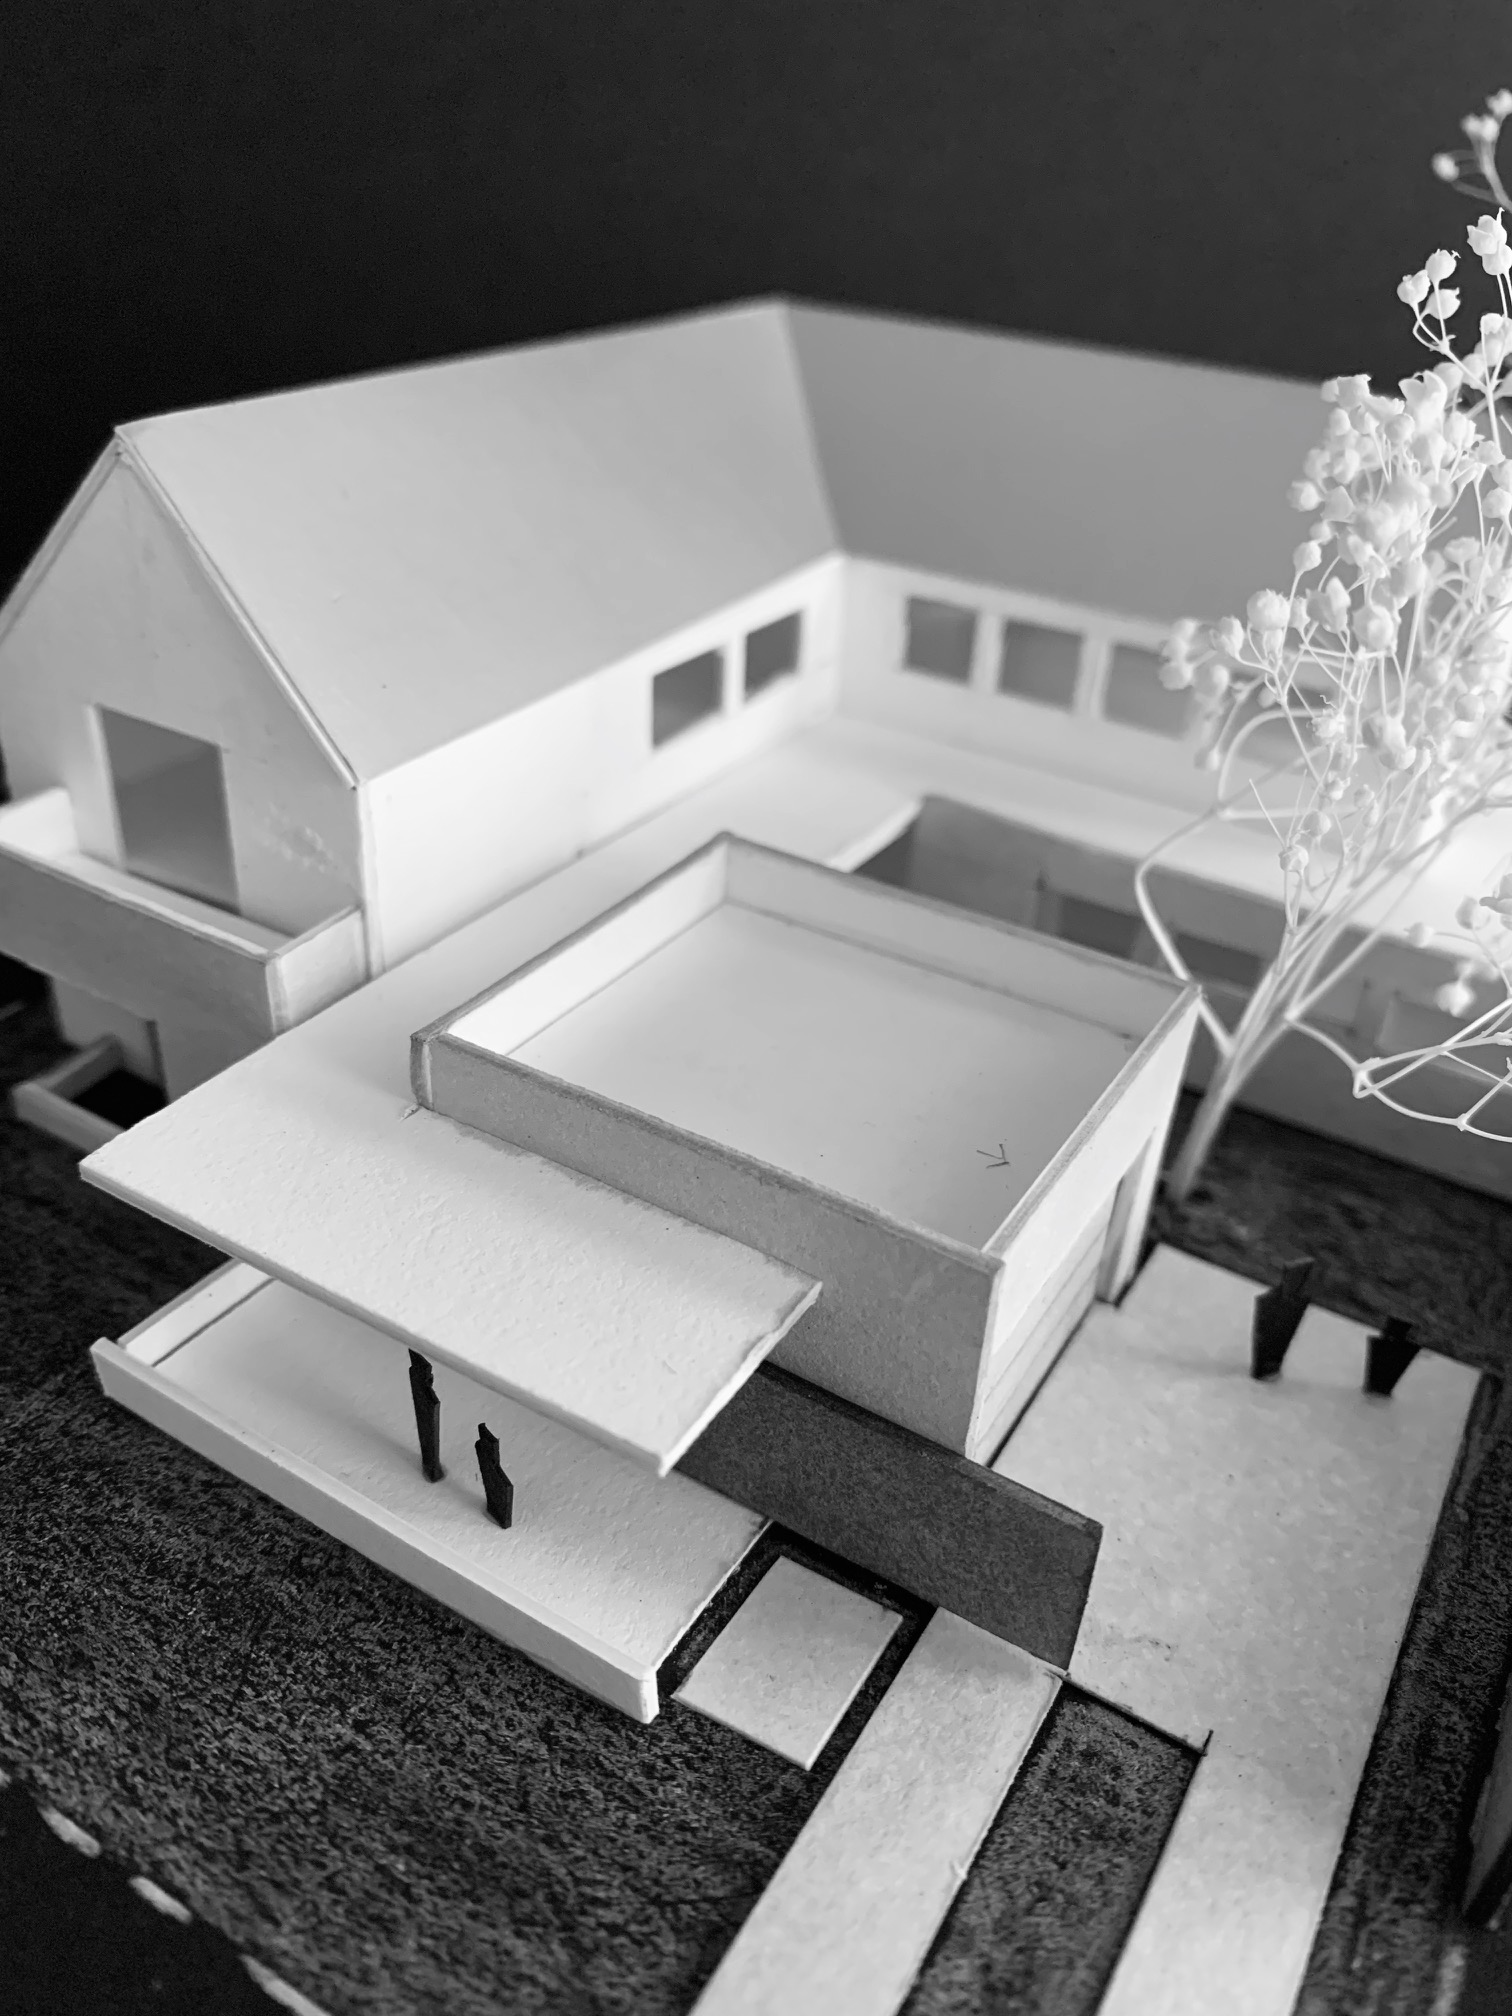 A model of the house is shown in black and white.